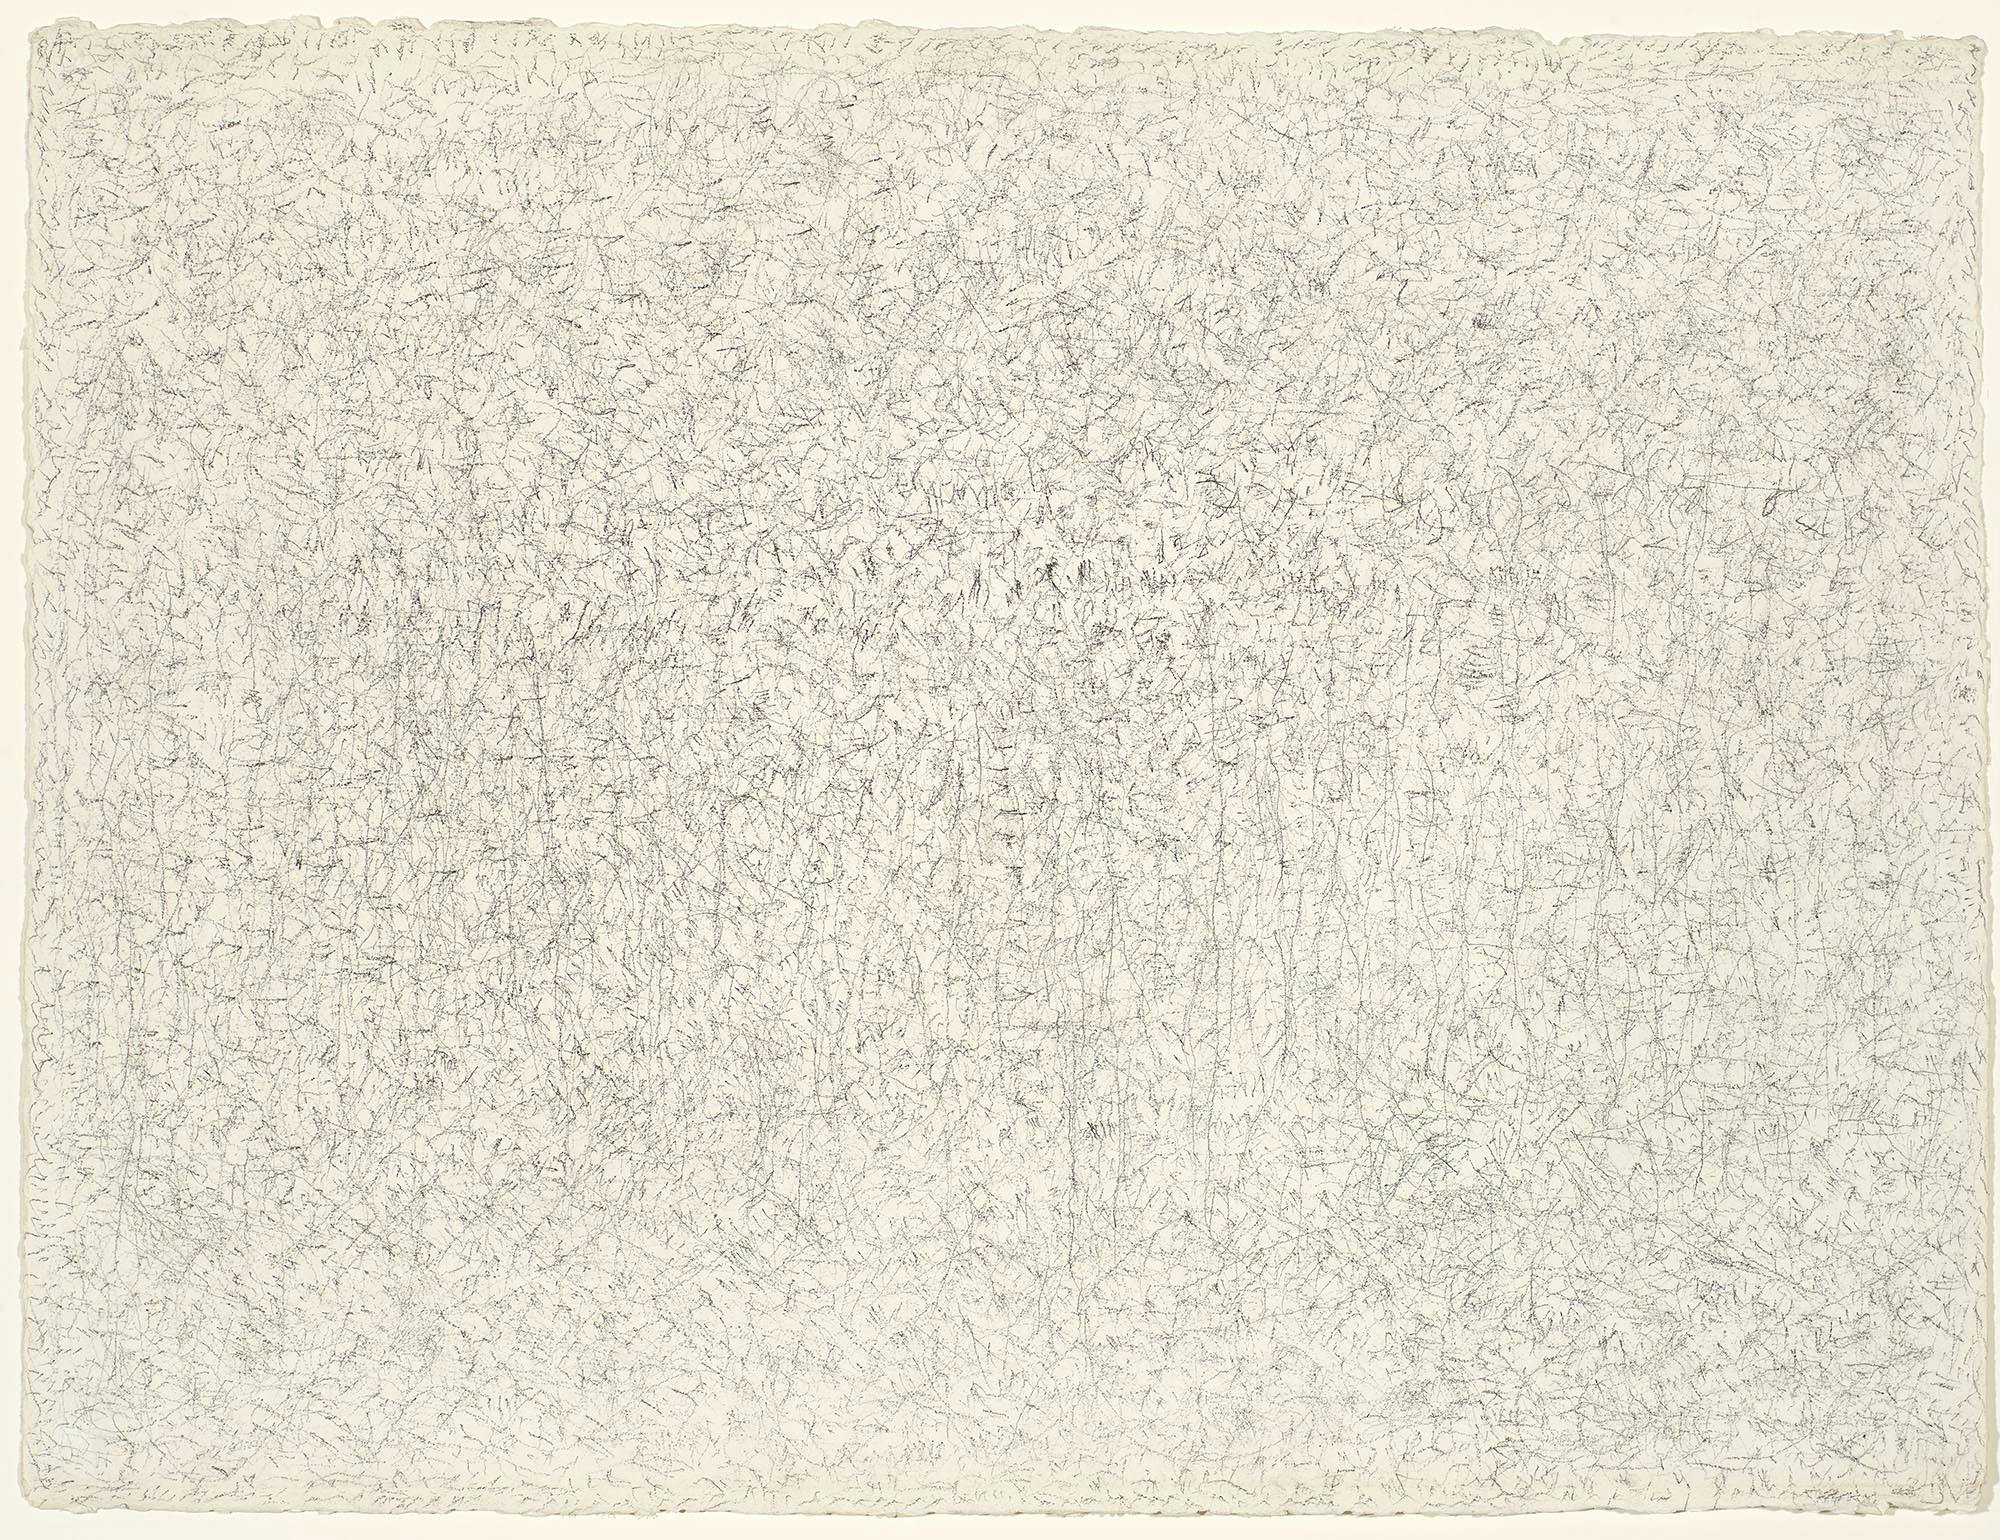 Untitled (Ramapo Freeze)
1976
Graphite on paper
22 1/2 x 30 in. (57.2 x 76.2 cm)
Bowdoin College Museum of Art, Brunswick, Maine
 – The Richard Pousette-Dart Foundation